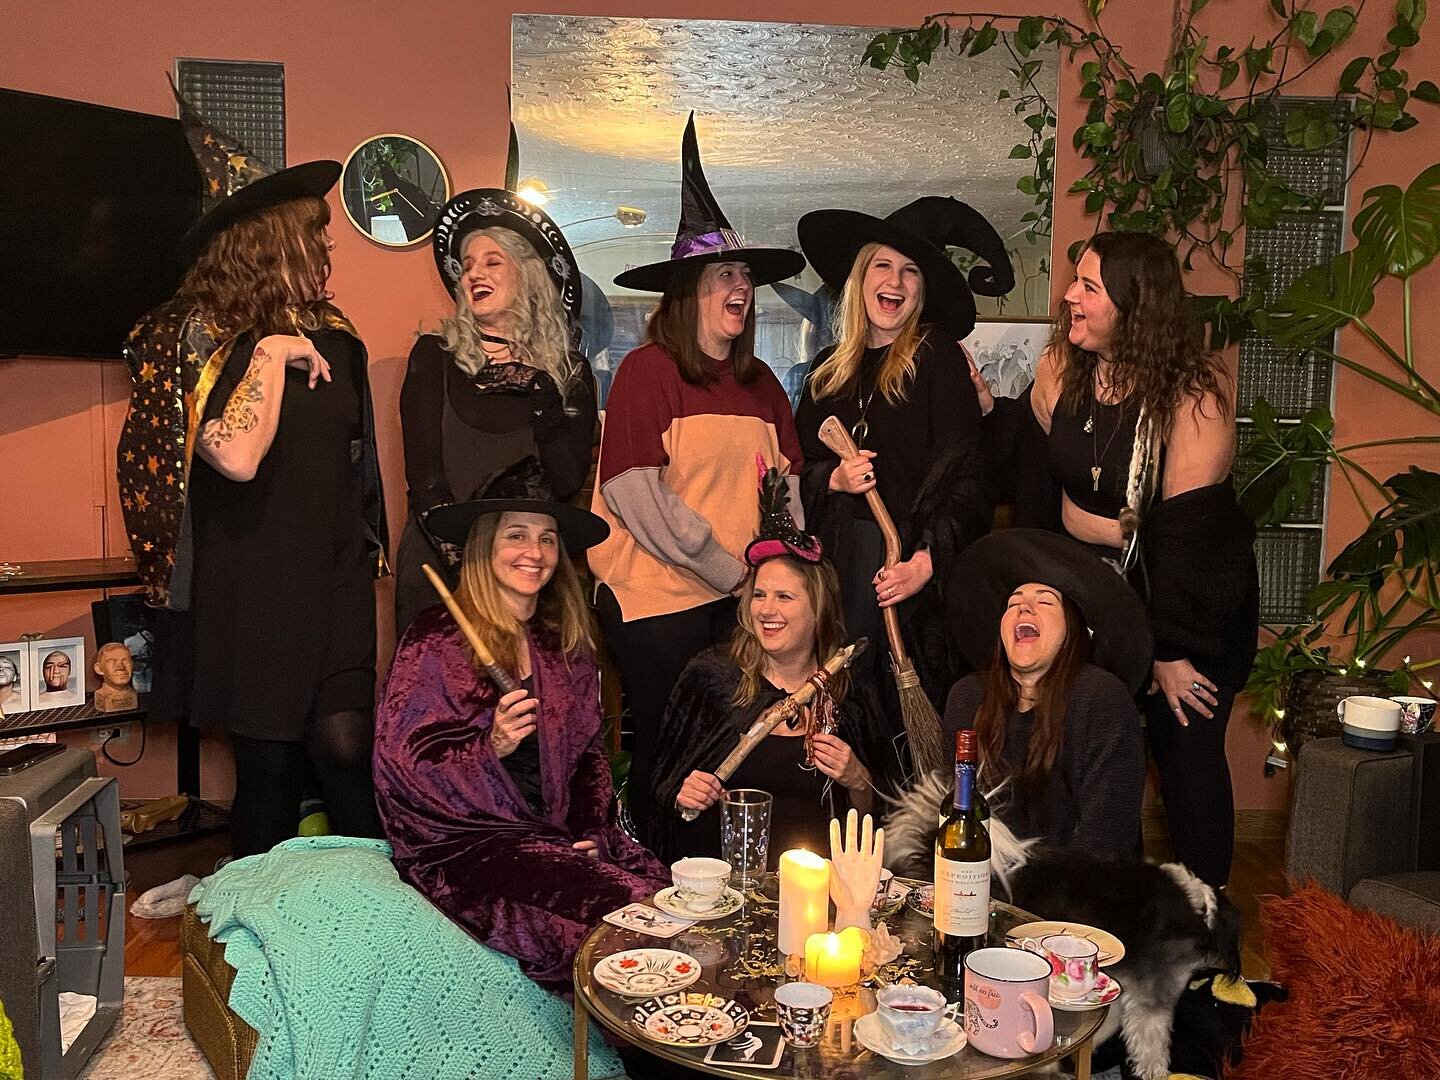 Get yourself friends who will dress up as a witch on a Tuesday, just because 🔮✨🖤
.
.
This is our women&rsquo;s circle 
.
We meet once a week to share what&rsquo;s on our hearts and what&rsquo;s on our minds
.
We laugh, we cry and we heal deeply
.
.